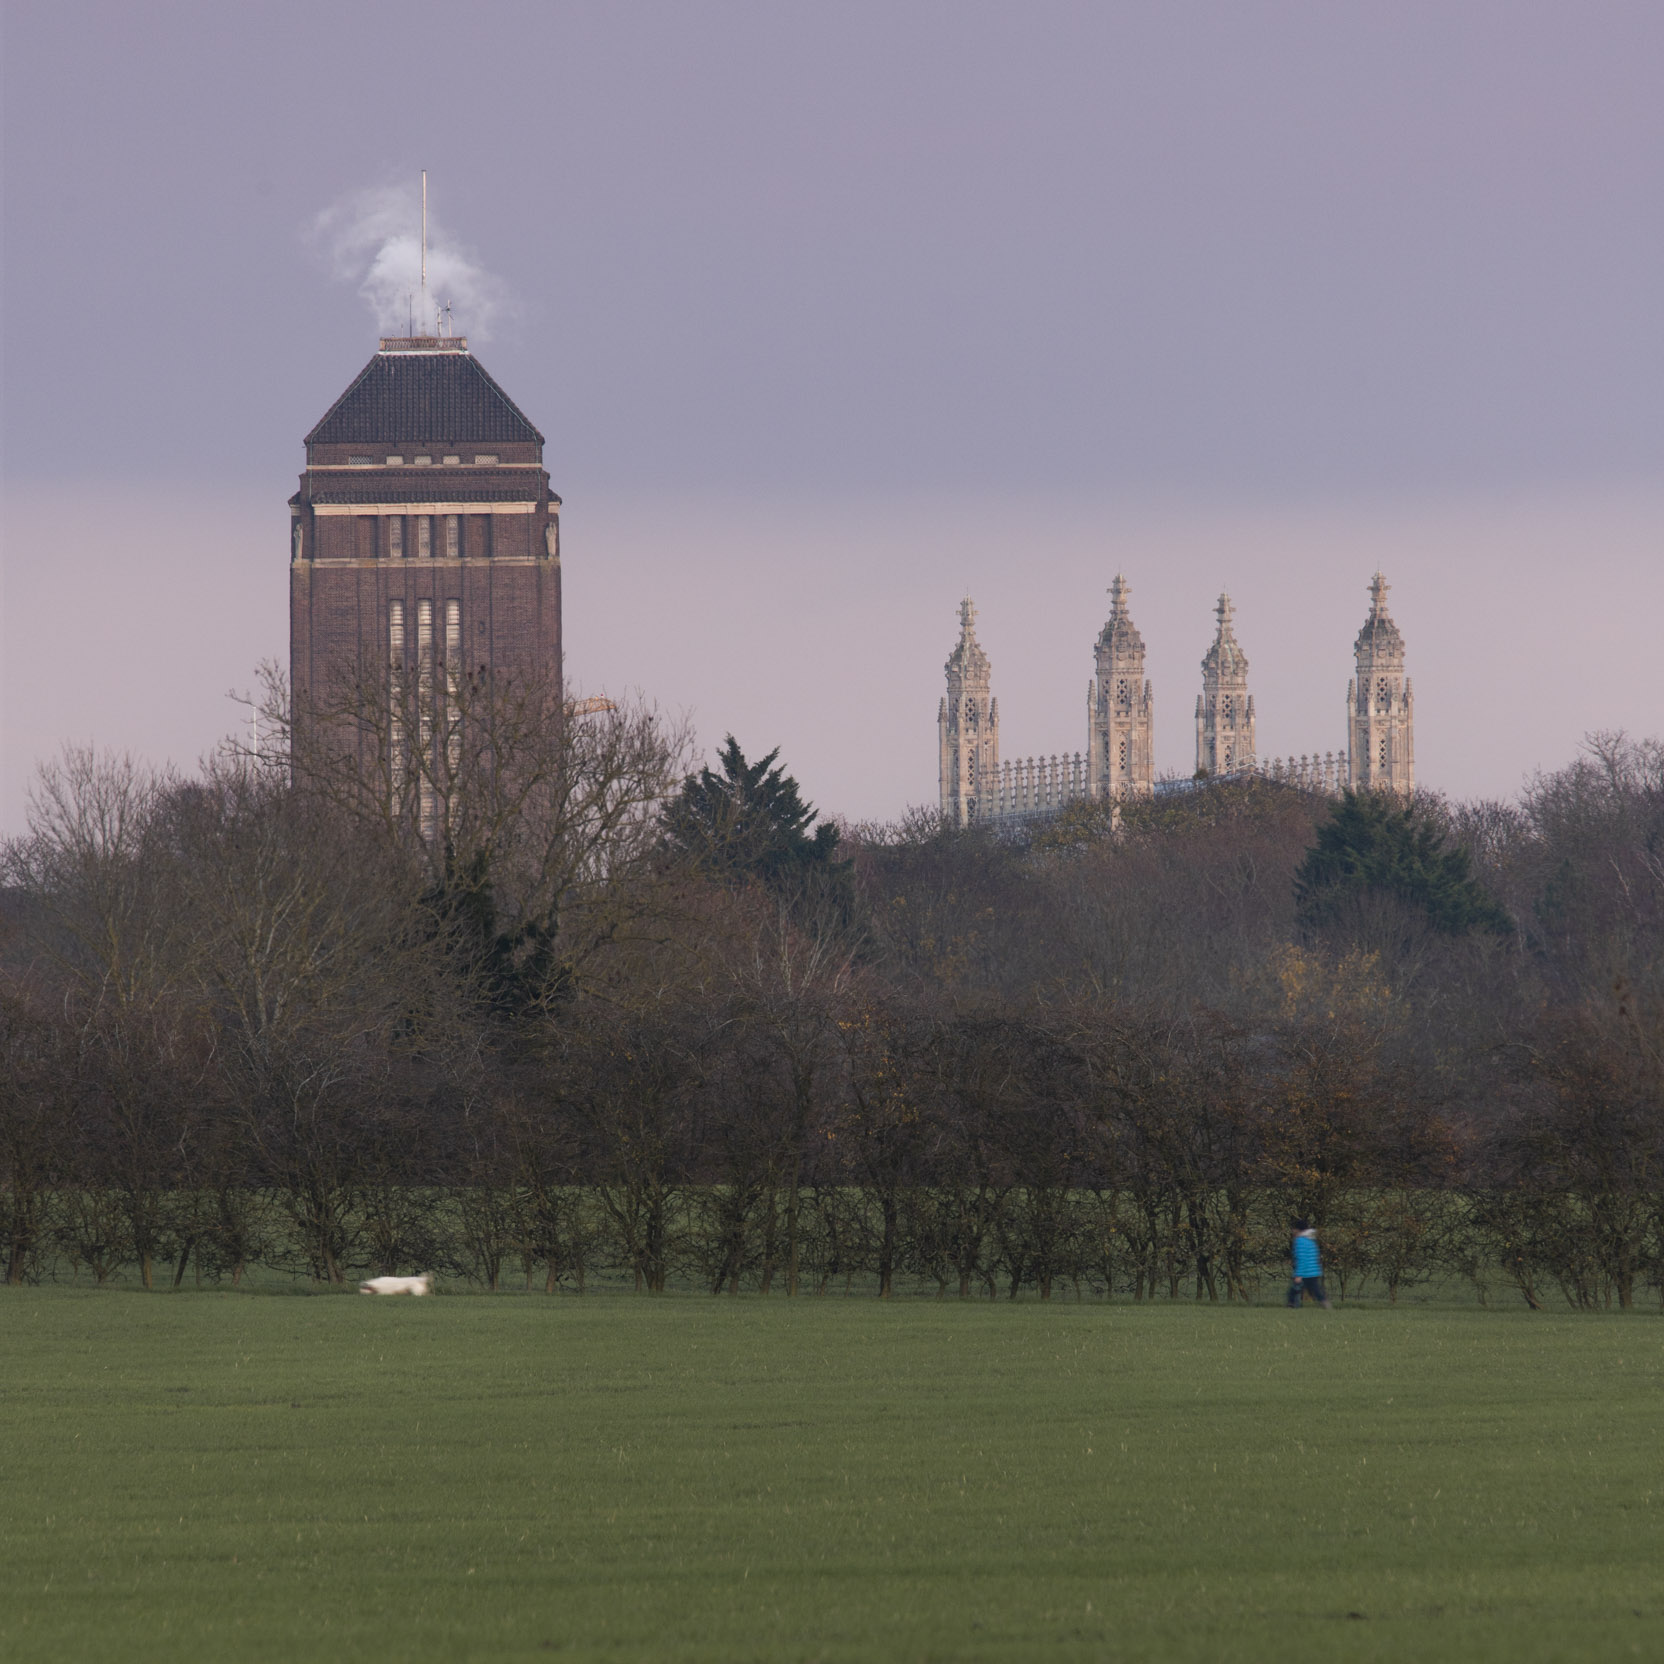 While I was waiting for the moon to rise over a different building in November 2022 (and hoping the clouds to go away) I found this view of Kings College Chapel and the UL. I saw a dog walker was going to walk past it, so I waited until they did and rattled off a few frames. Definitely a view I need to come back to when the weather is nicer.